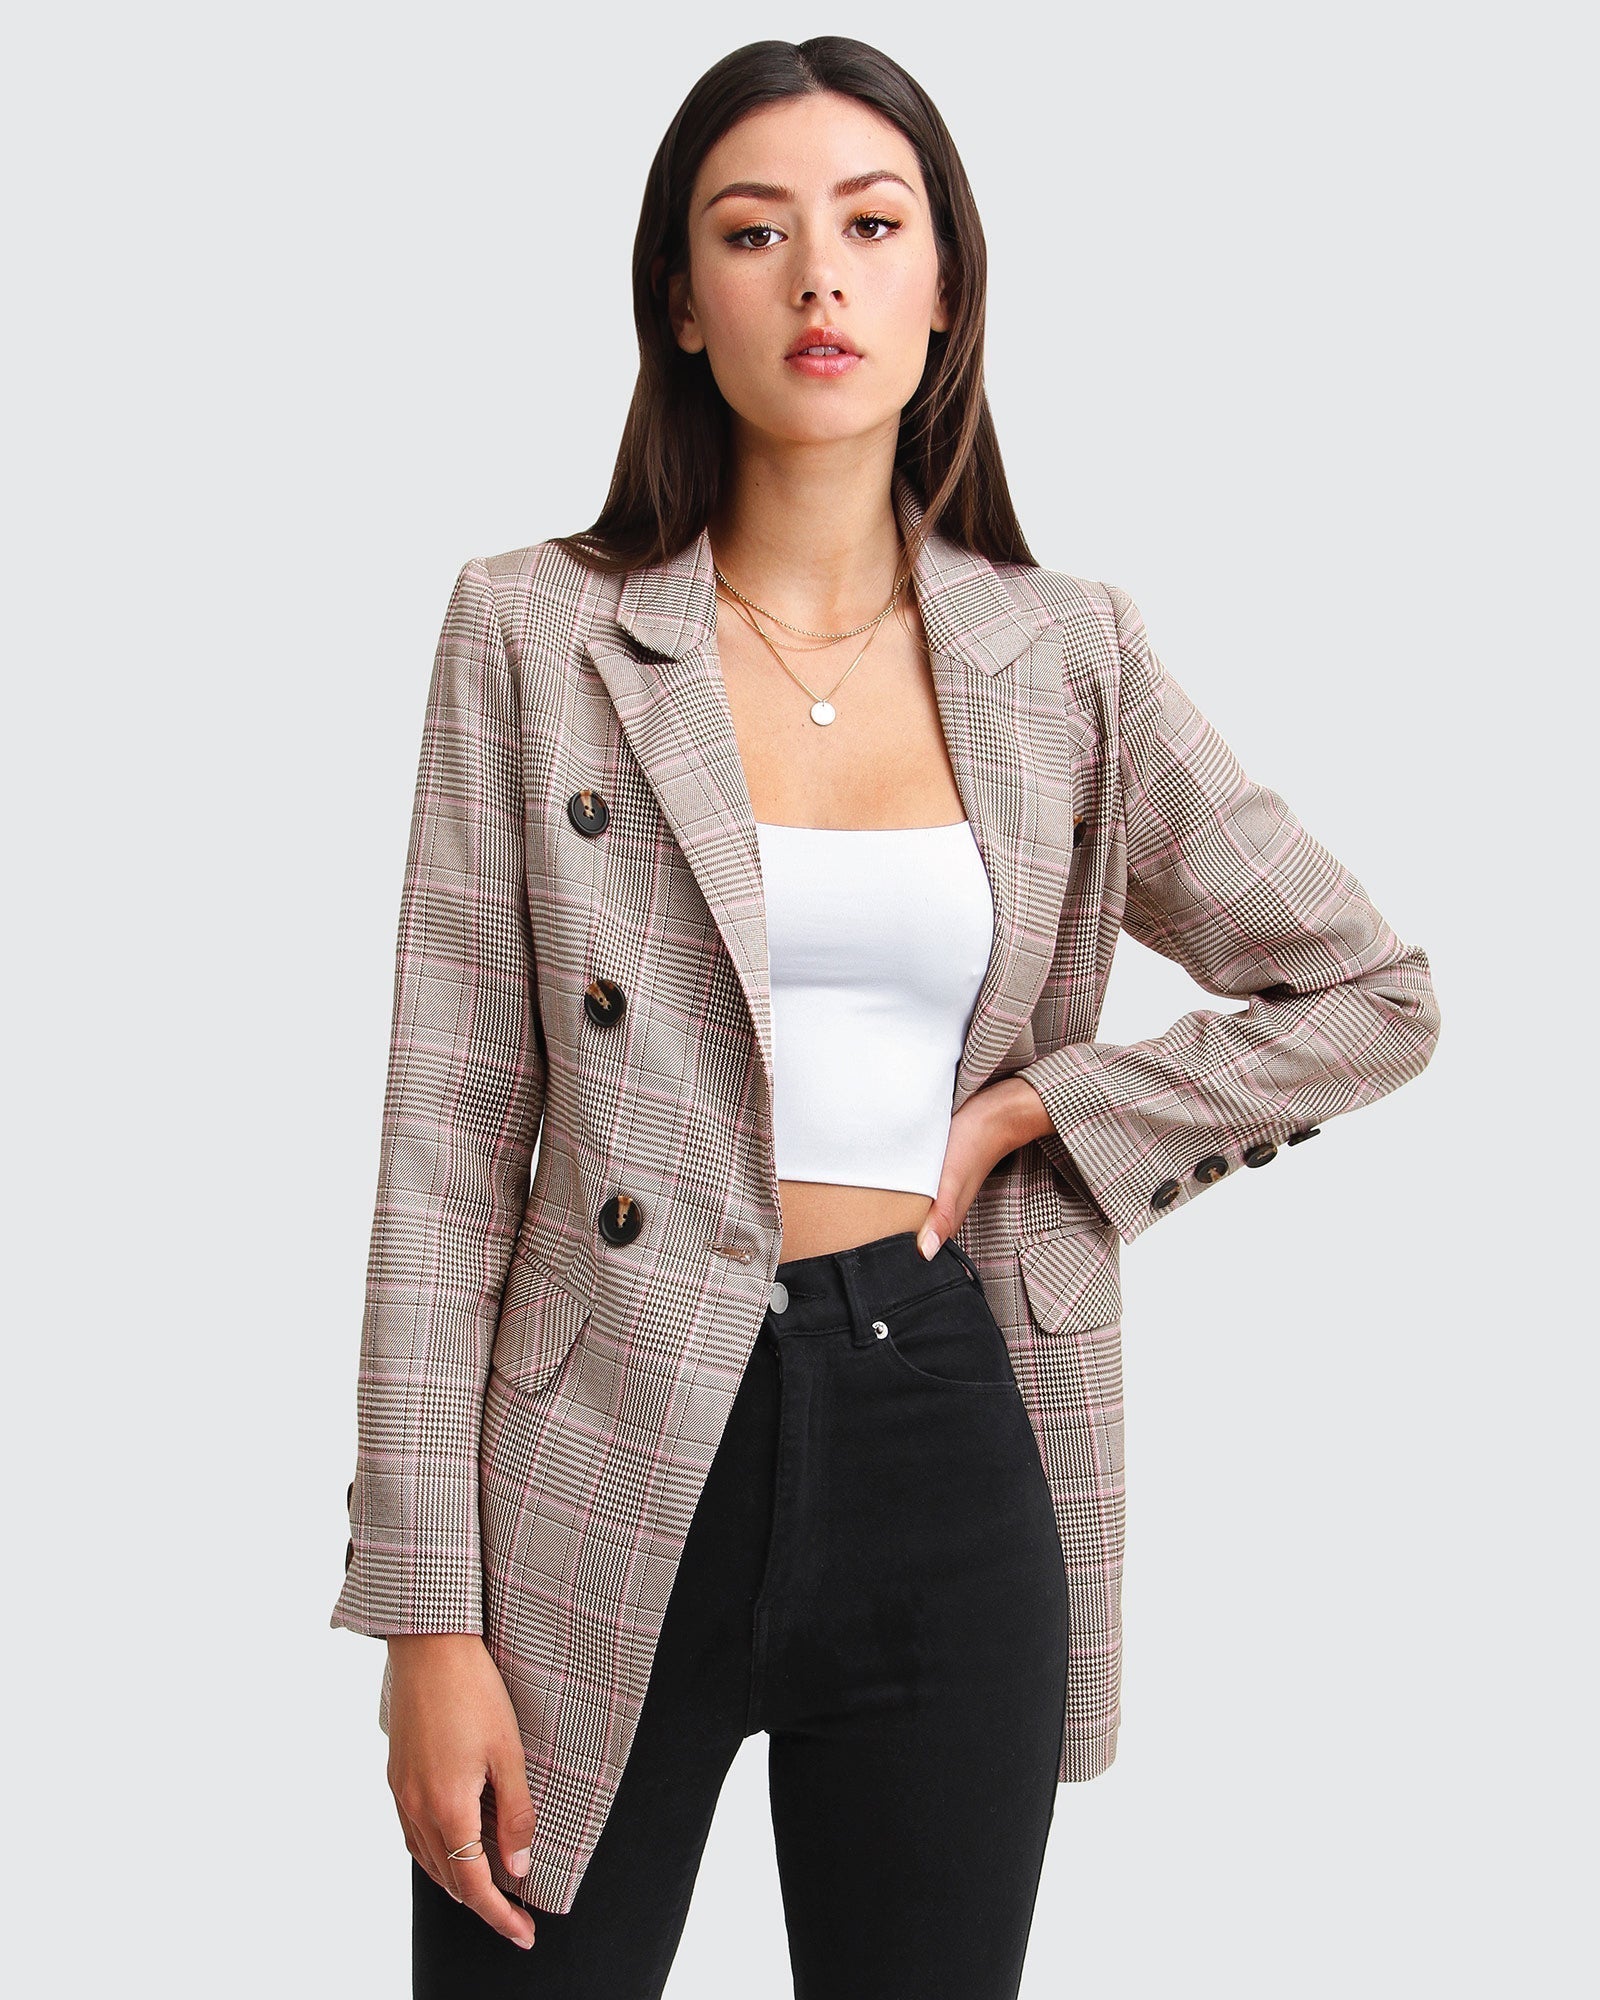 You Are Not Too Young for a Check Blazer